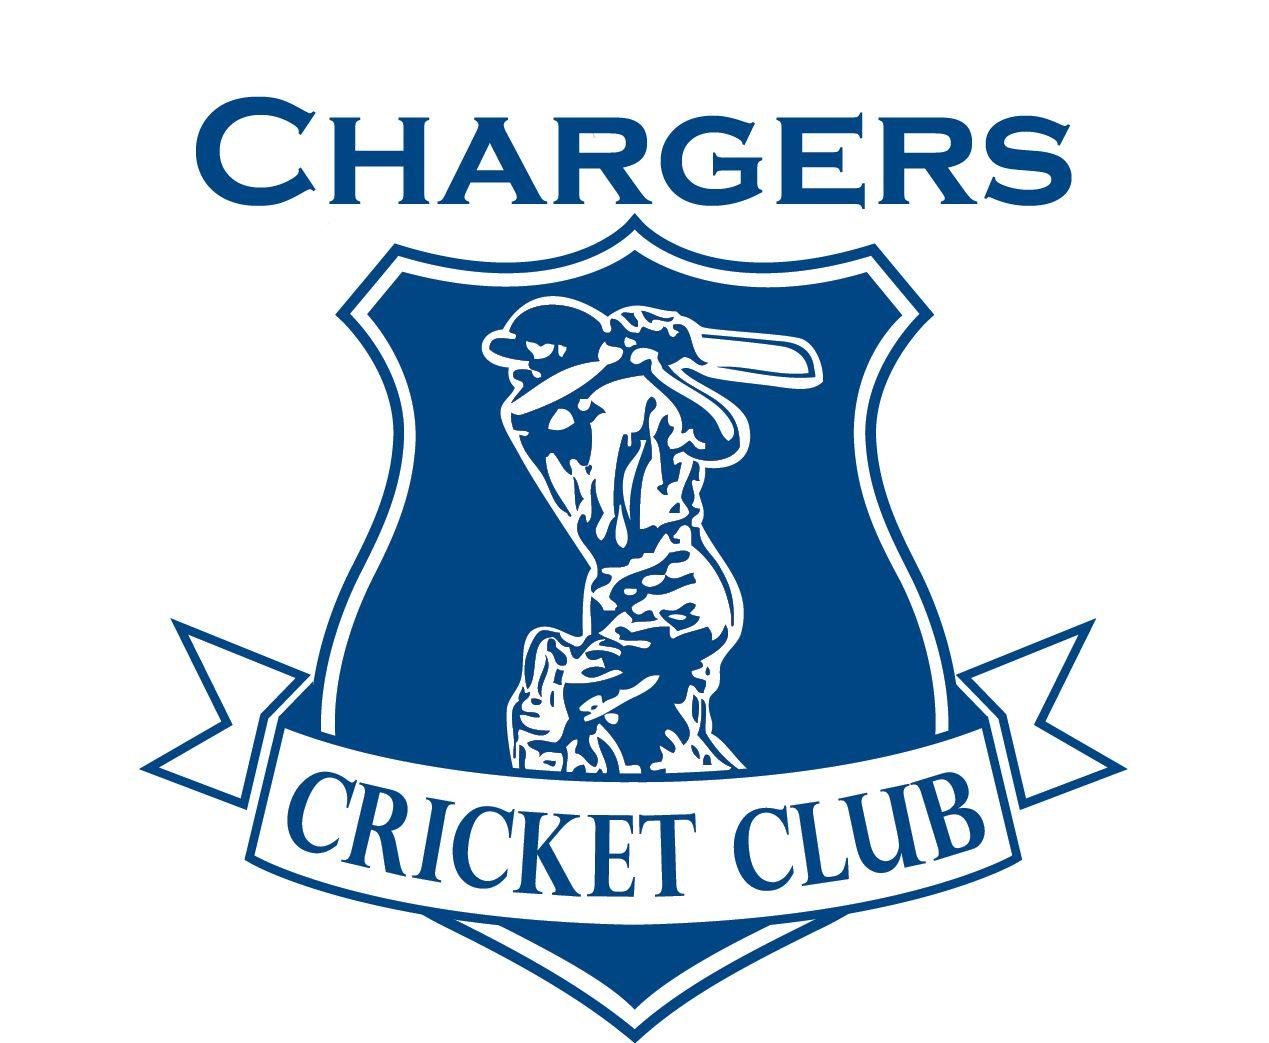 Cricket Club Logo - Chargers Cricket Club. Welcome to my website